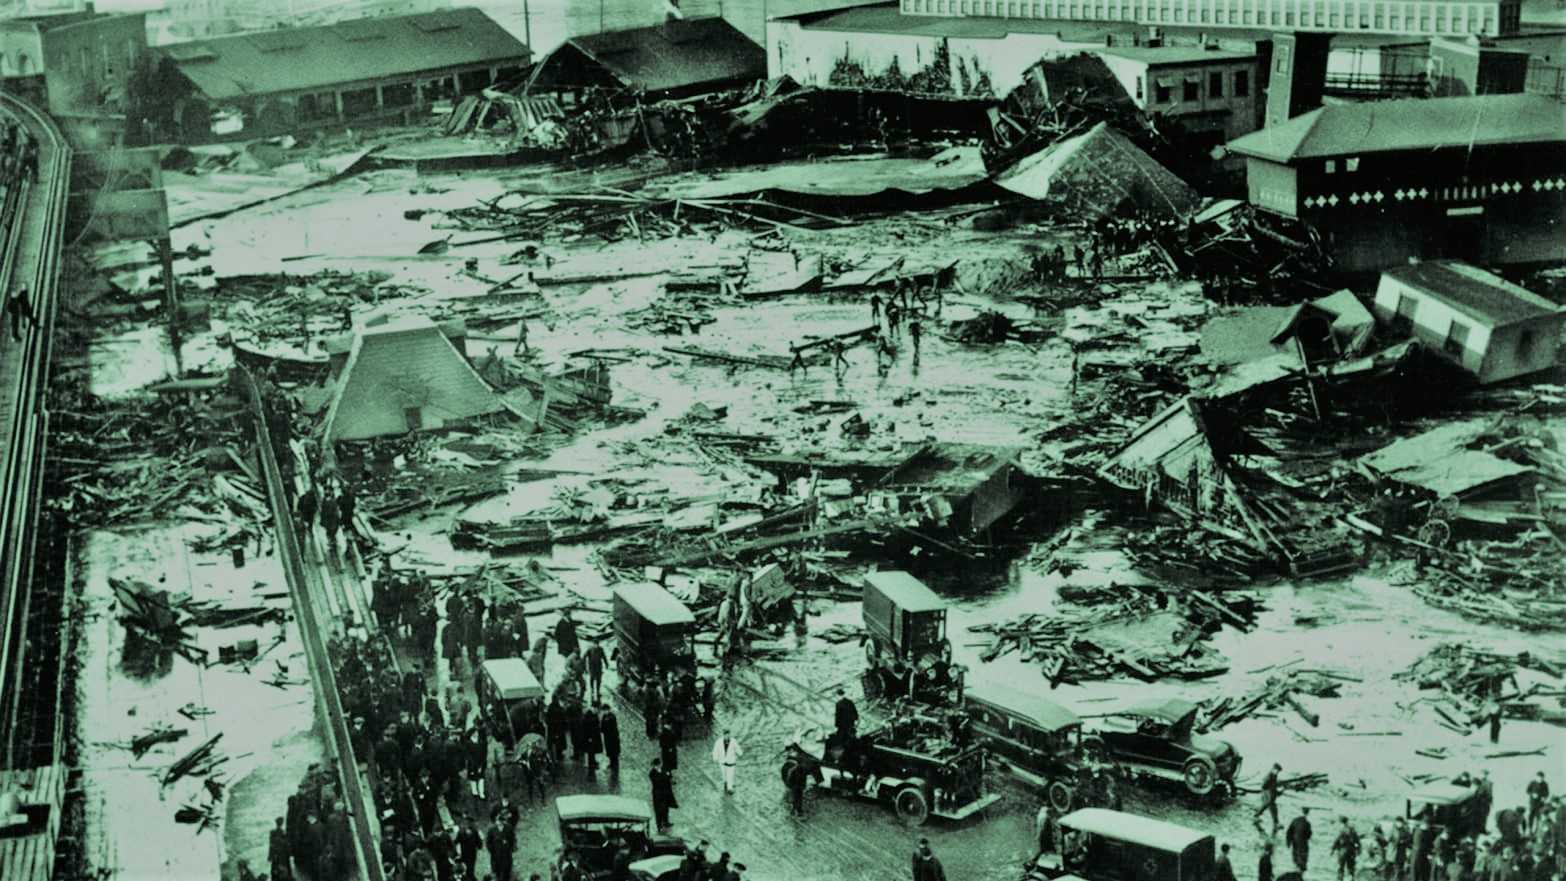  The Great Molasses Flood and the Celtics